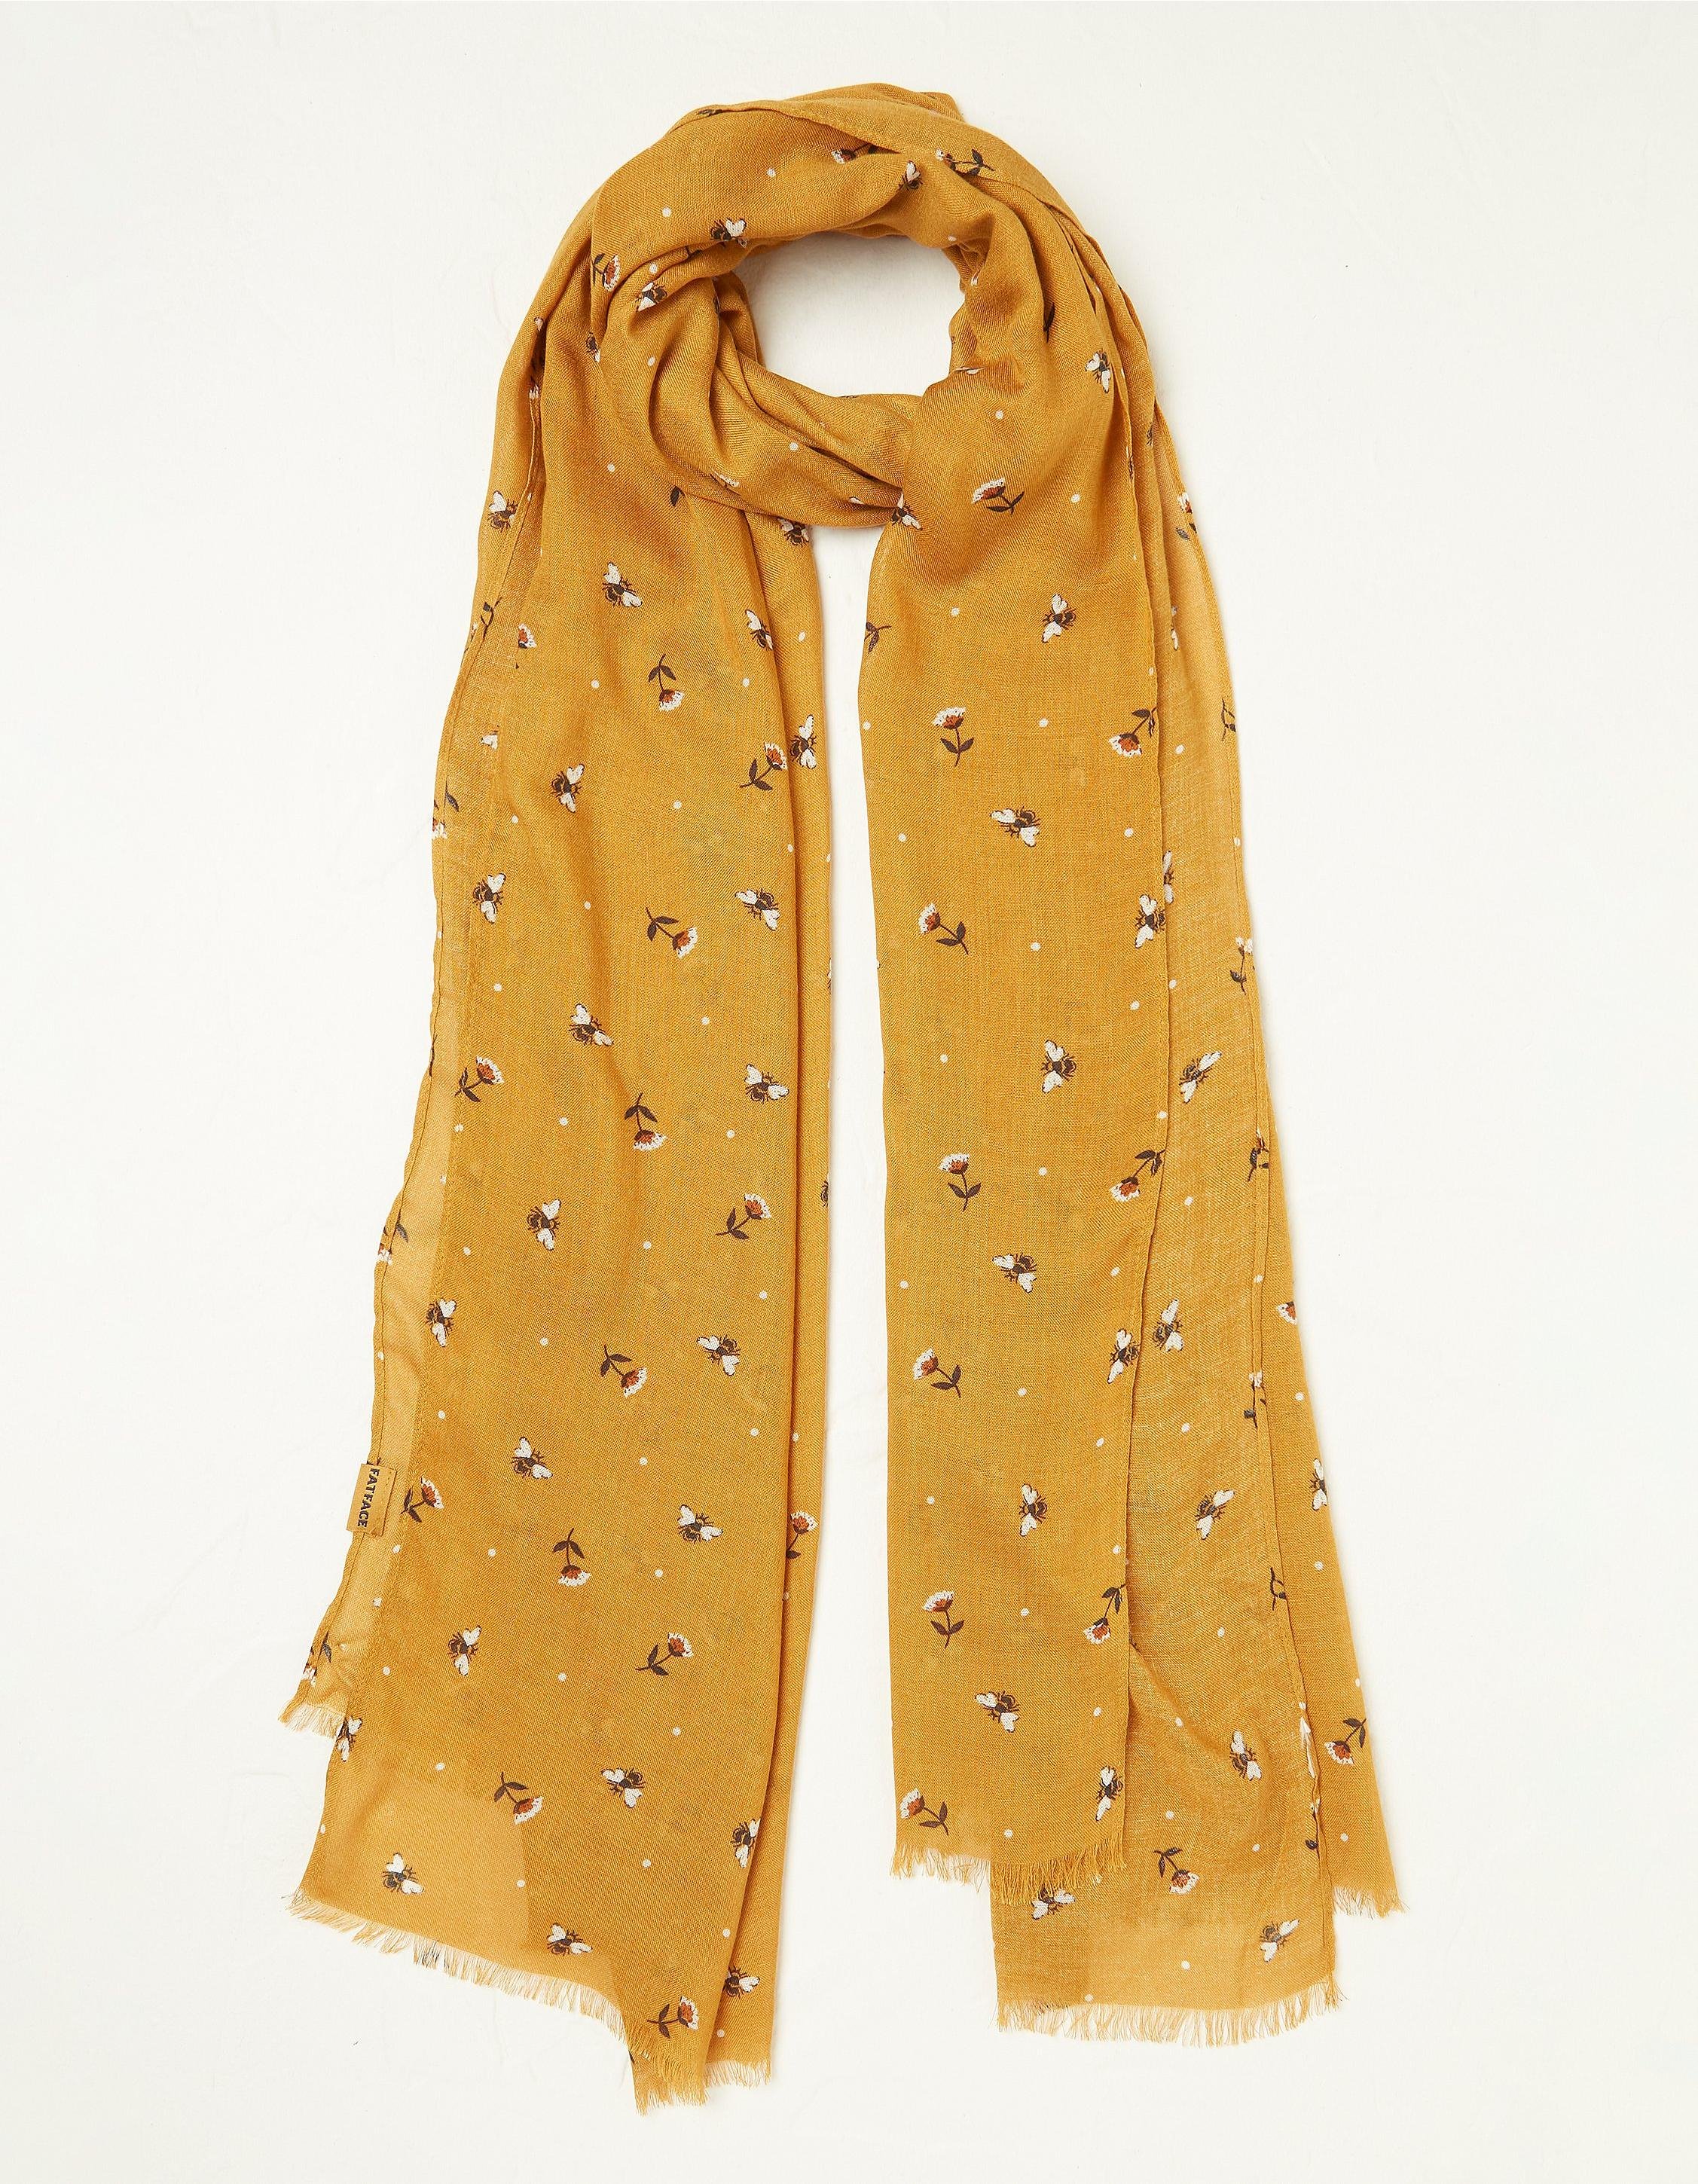 FATFACE Bee Floating Bloom Scarf €33, 